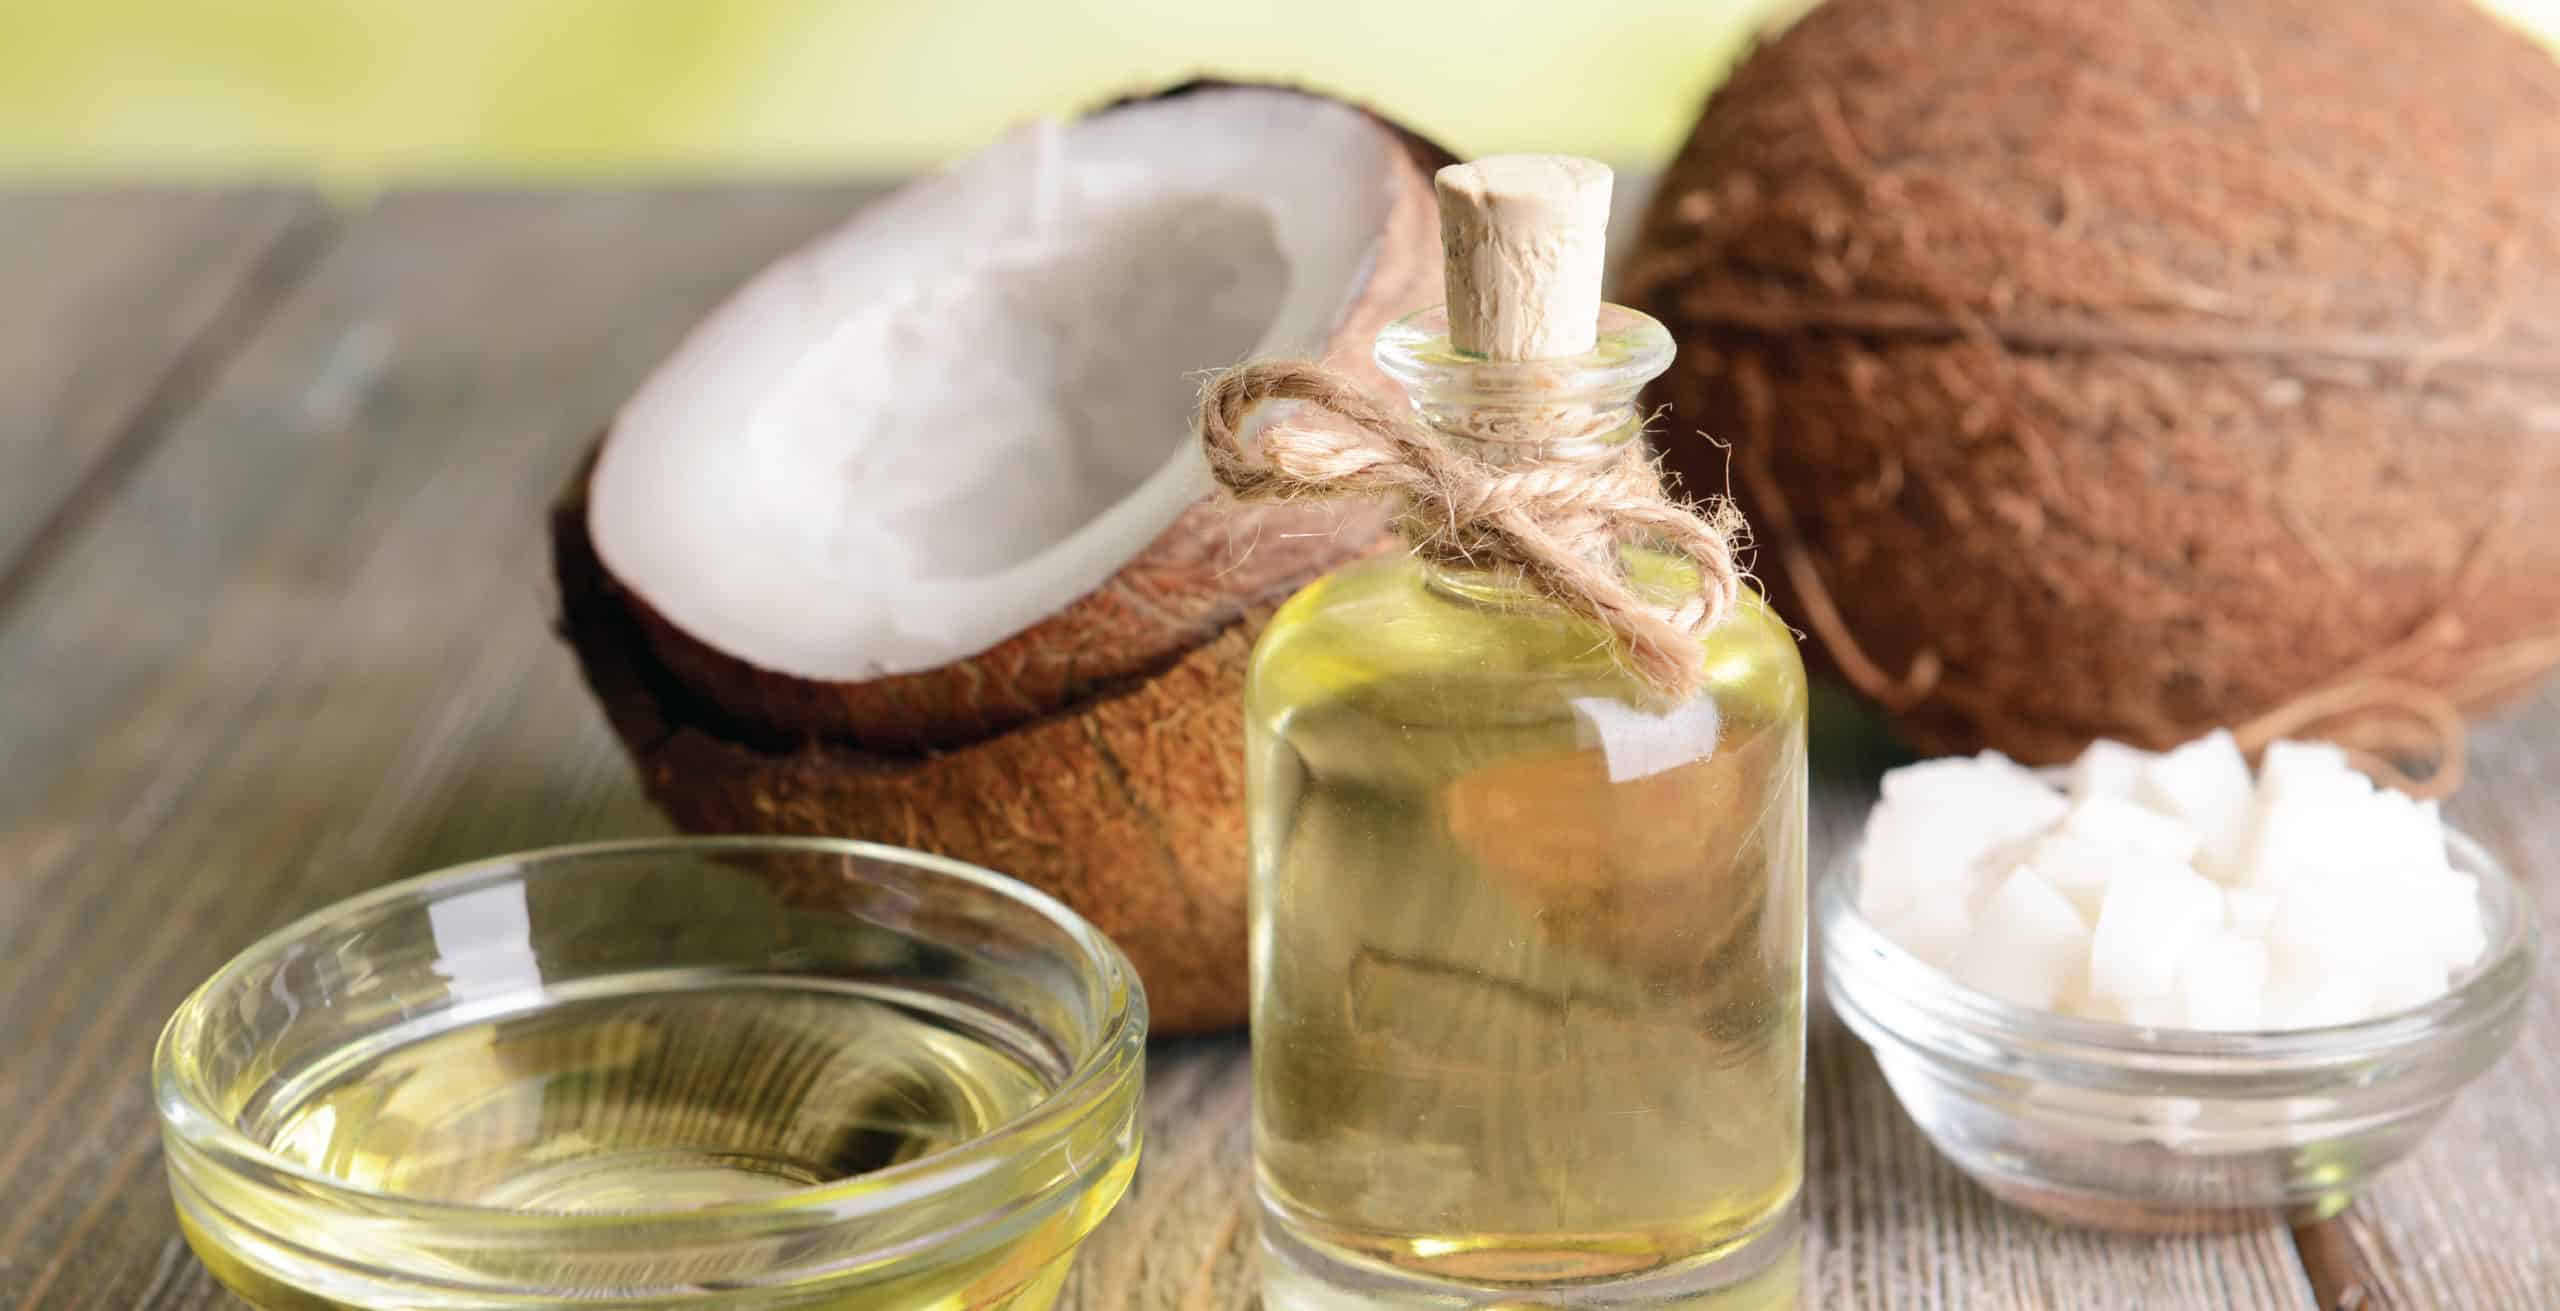 Coconut Oil for Skin: Uses, Benefits, and More